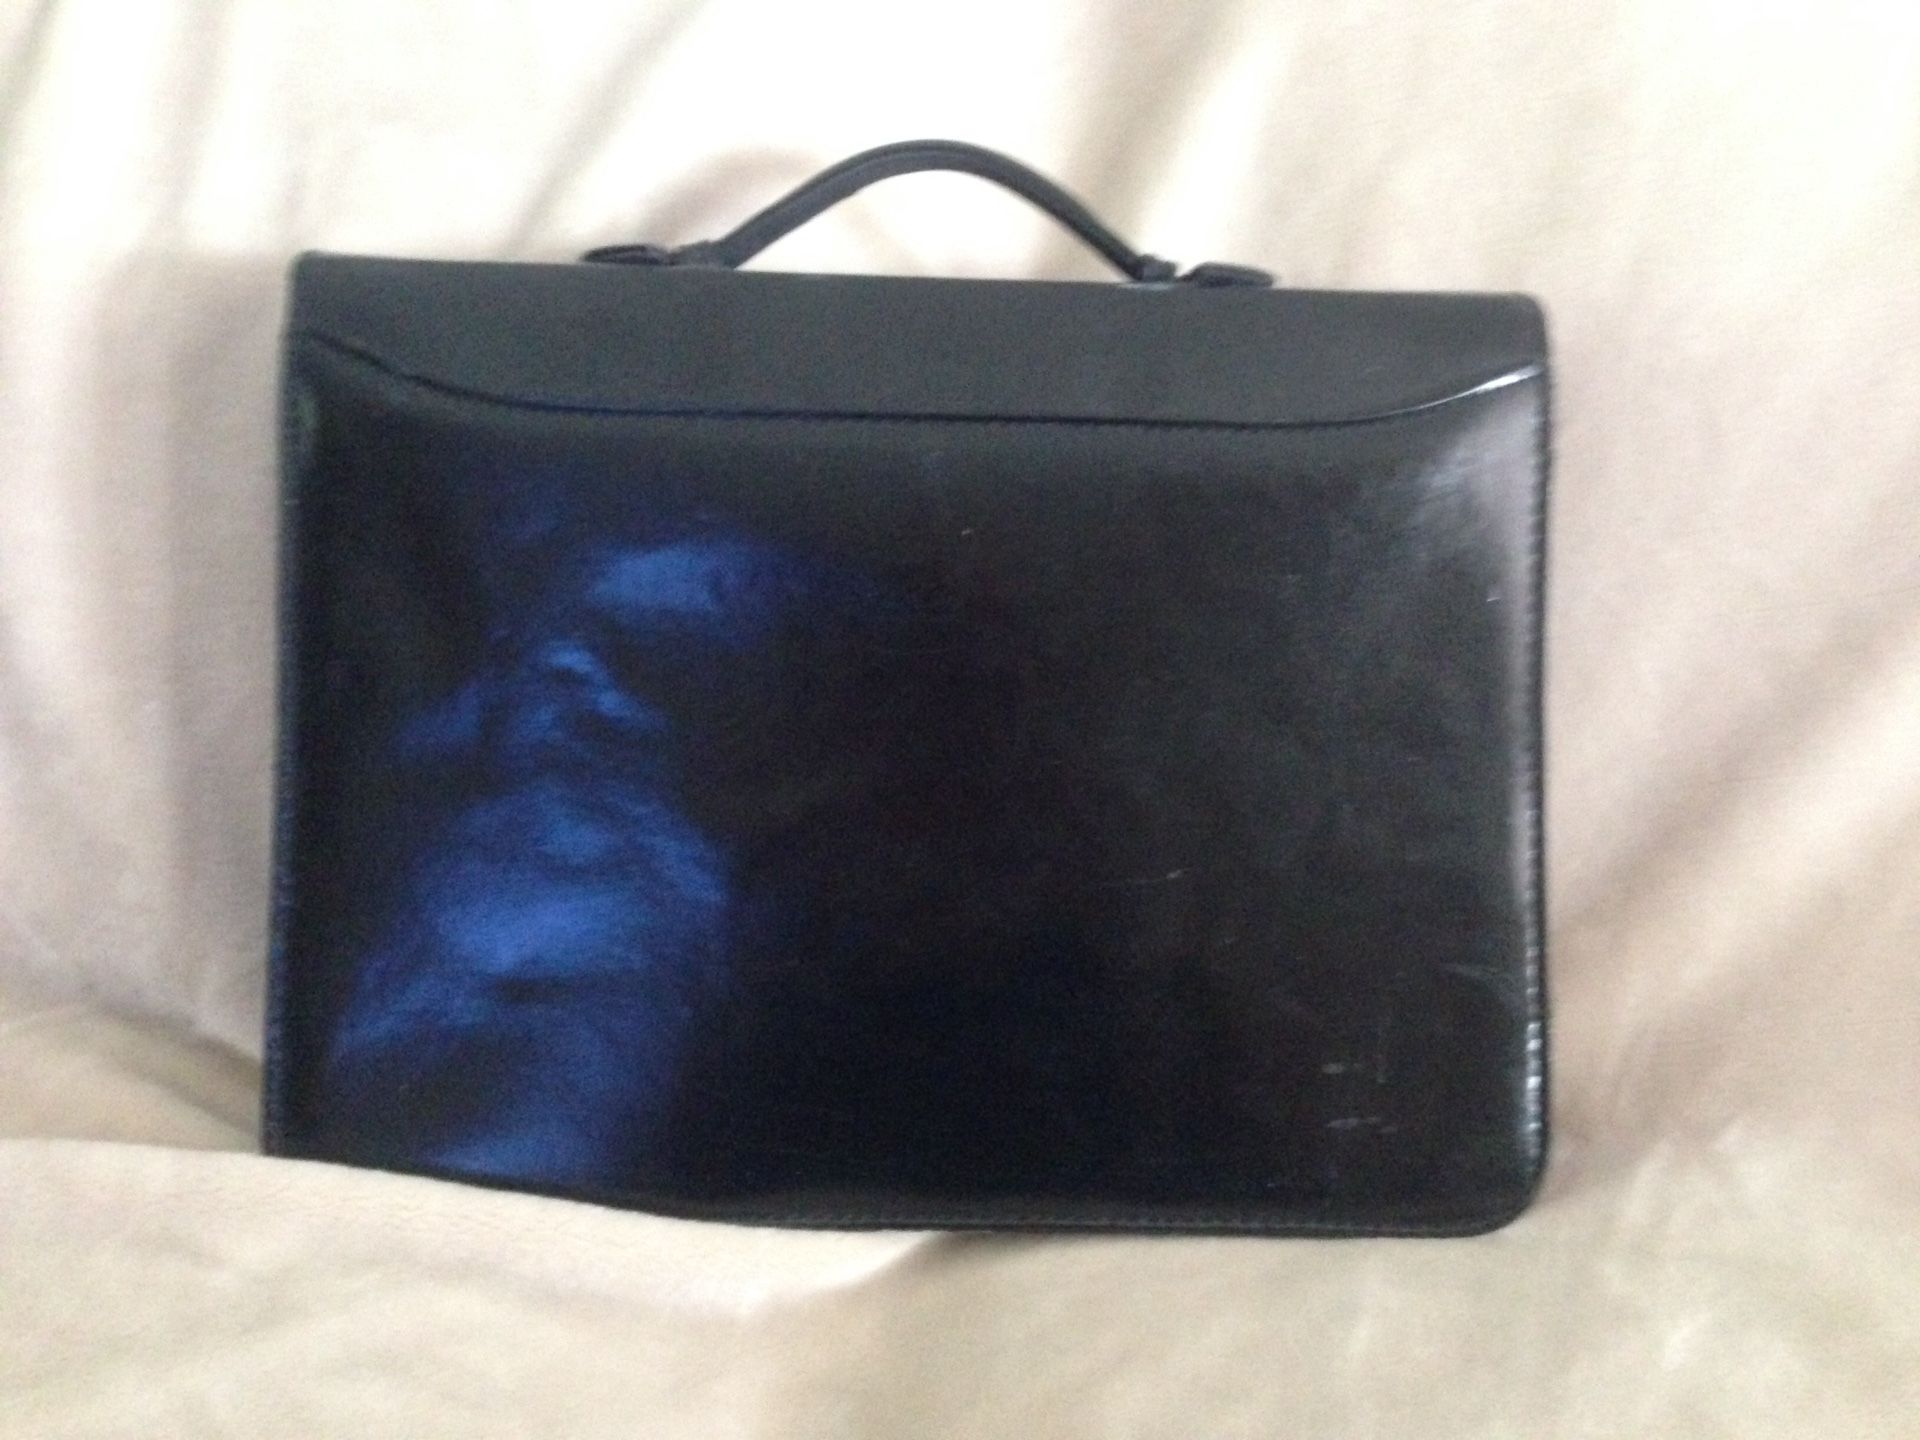 Real Leather Laptop Or Brief Case